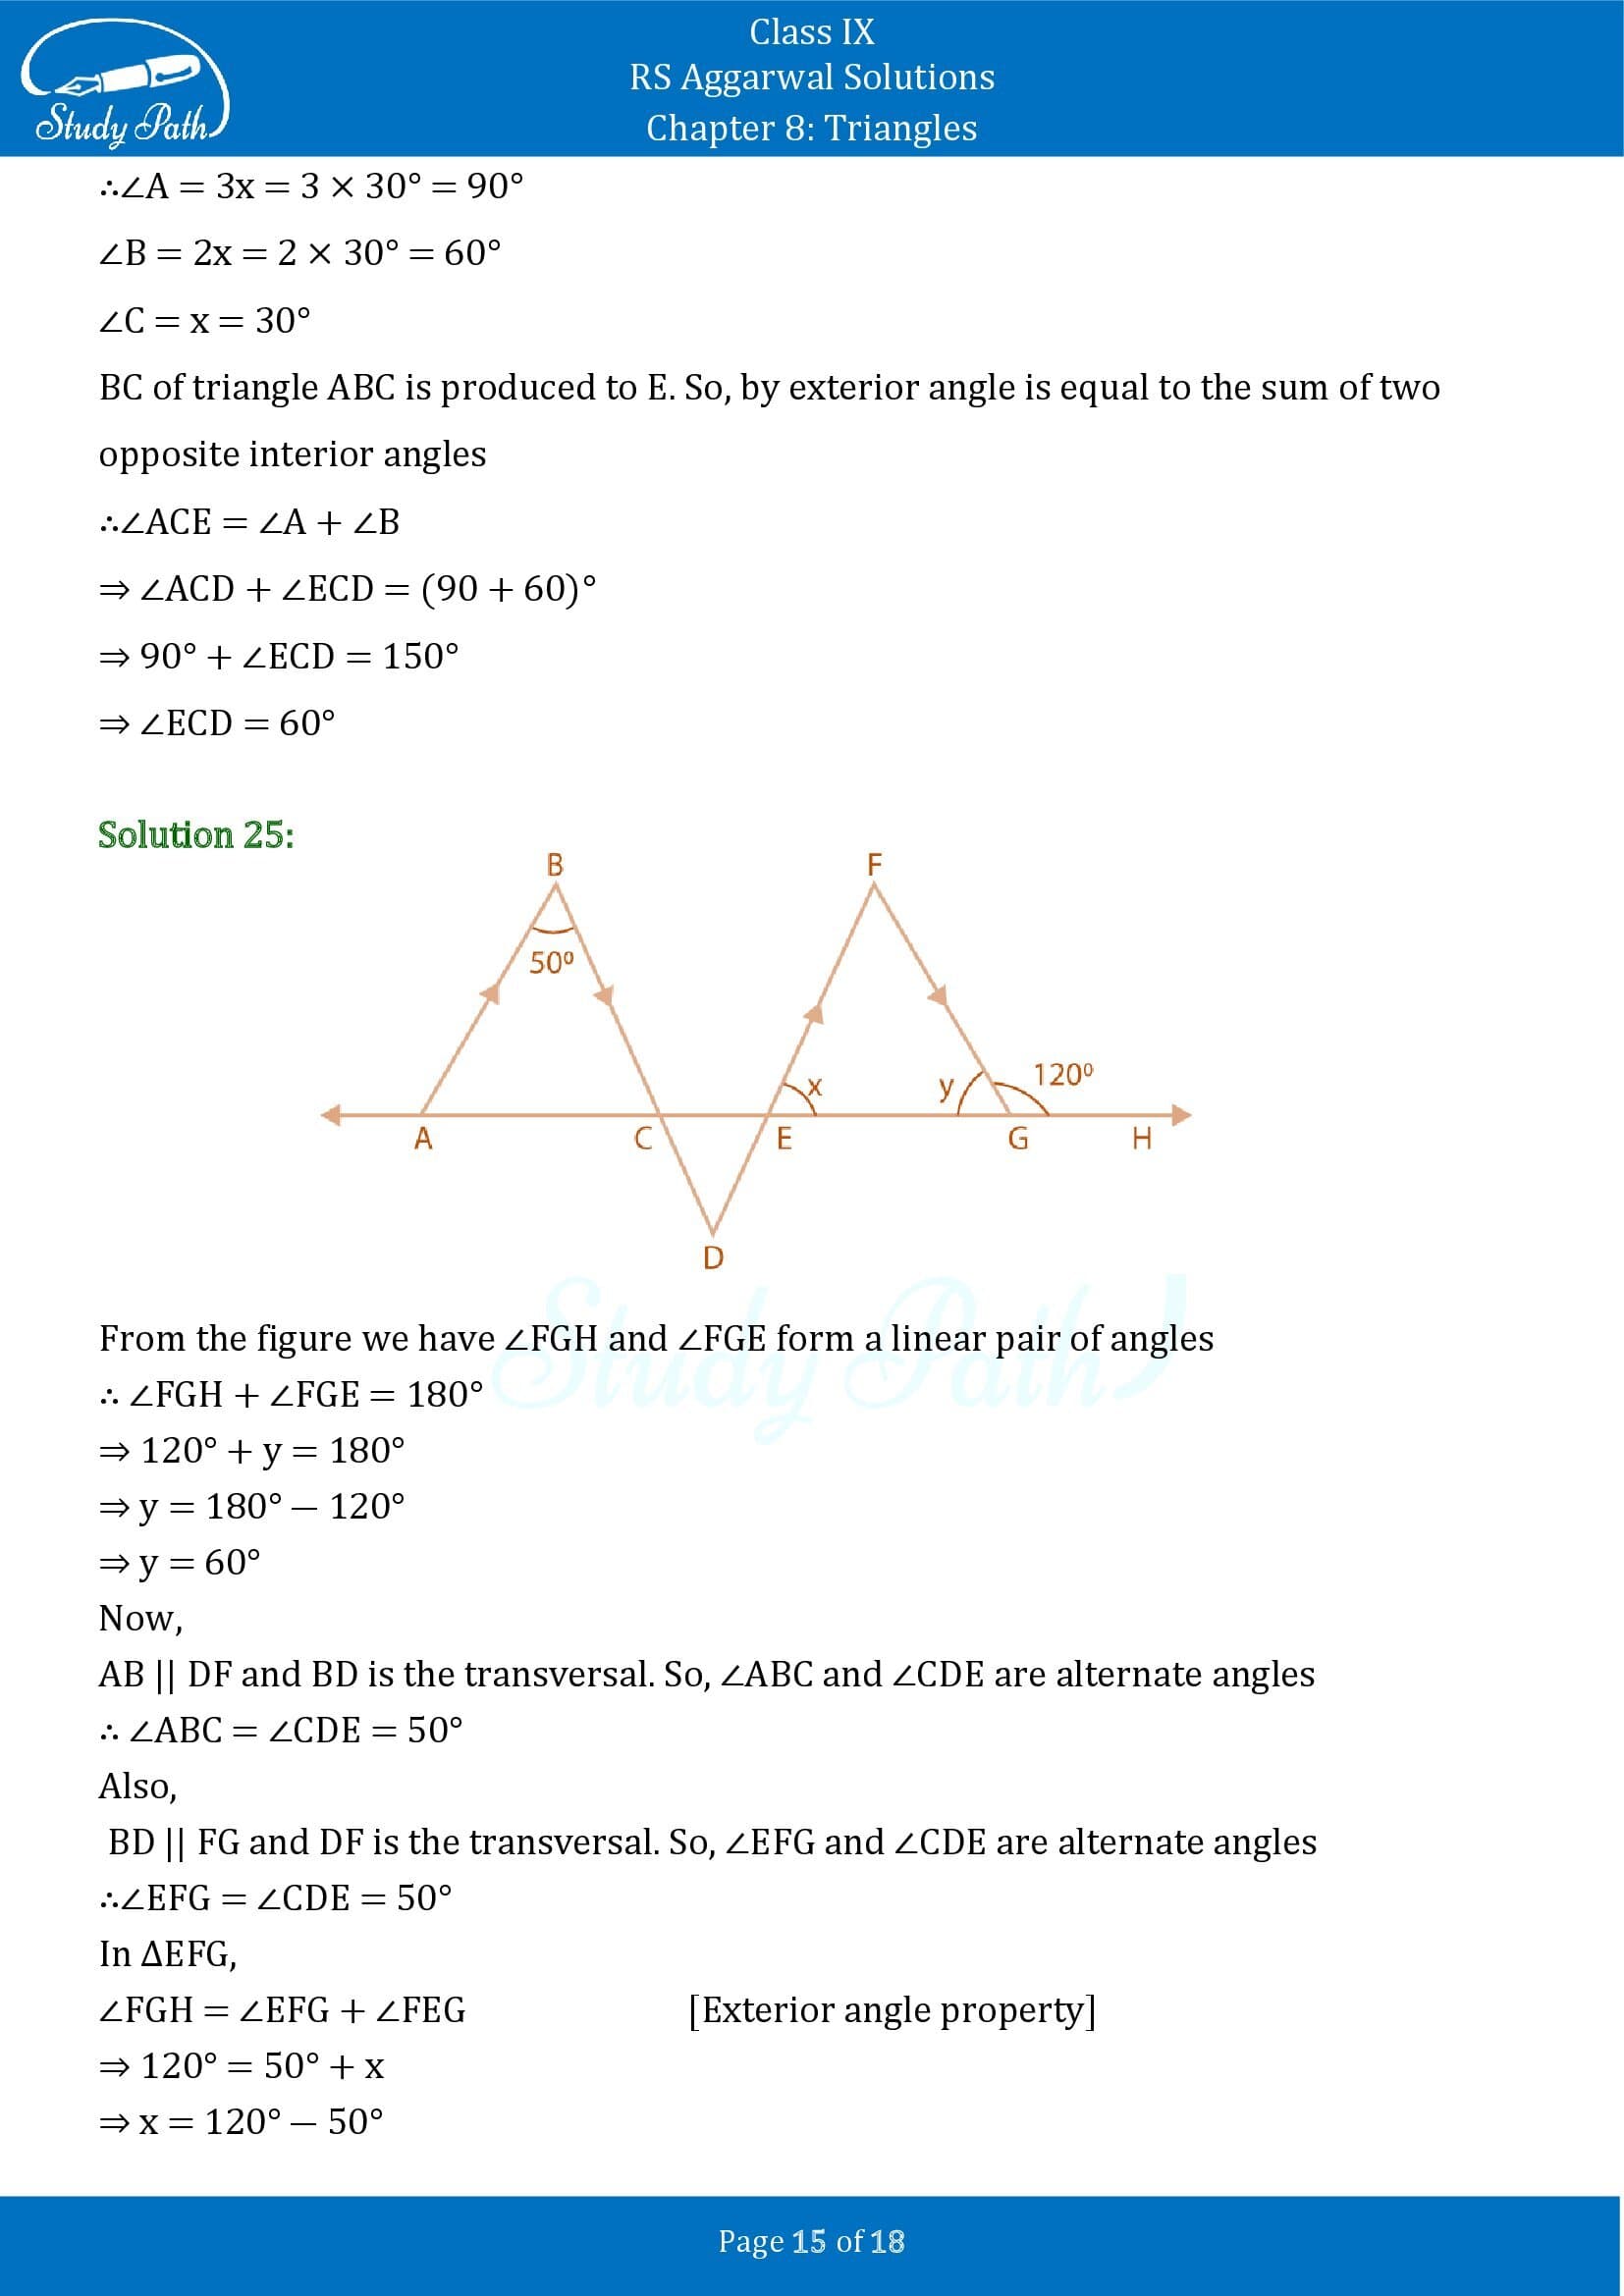 RS Aggarwal Solutions Class 9 Chapter 8 Triangles Exercise 8 0015